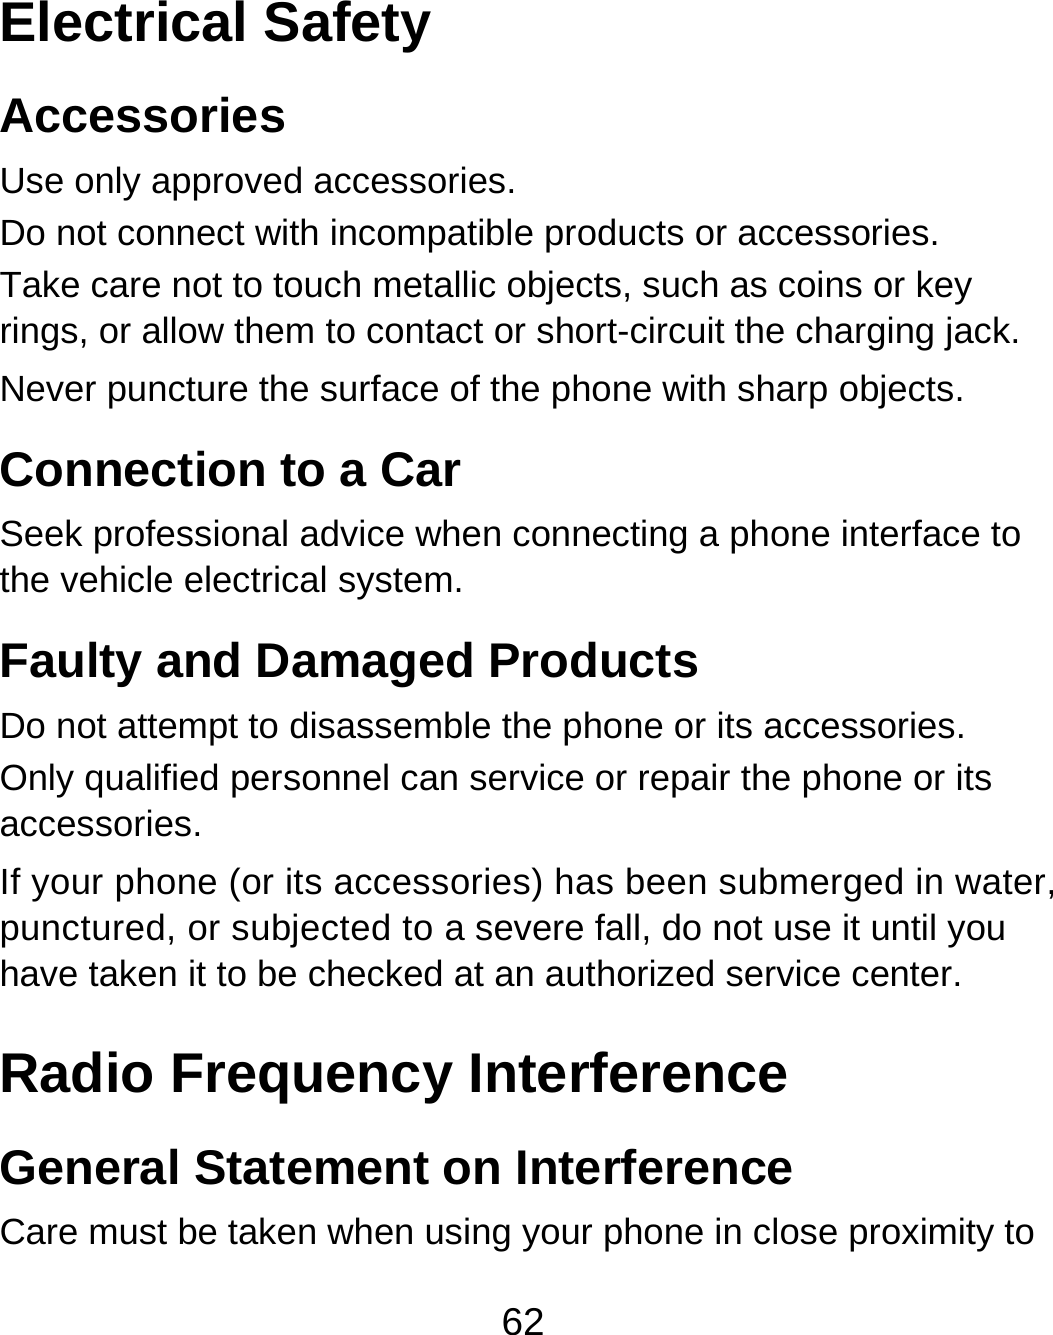 62 Electrical Safety Accessories Use only approved accessories. Do not connect with incompatible products or accessories. Take care not to touch metallic objects, such as coins or key rings, or allow them to contact or short-circuit the charging jack. Never puncture the surface of the phone with sharp objects. Connection to a Car Seek professional advice when connecting a phone interface to the vehicle electrical system. Faulty and Damaged Products Do not attempt to disassemble the phone or its accessories. Only qualified personnel can service or repair the phone or its accessories. If your phone (or its accessories) has been submerged in water, punctured, or subjected to a severe fall, do not use it until you have taken it to be checked at an authorized service center. Radio Frequency Interference General Statement on Interference Care must be taken when using your phone in close proximity to 